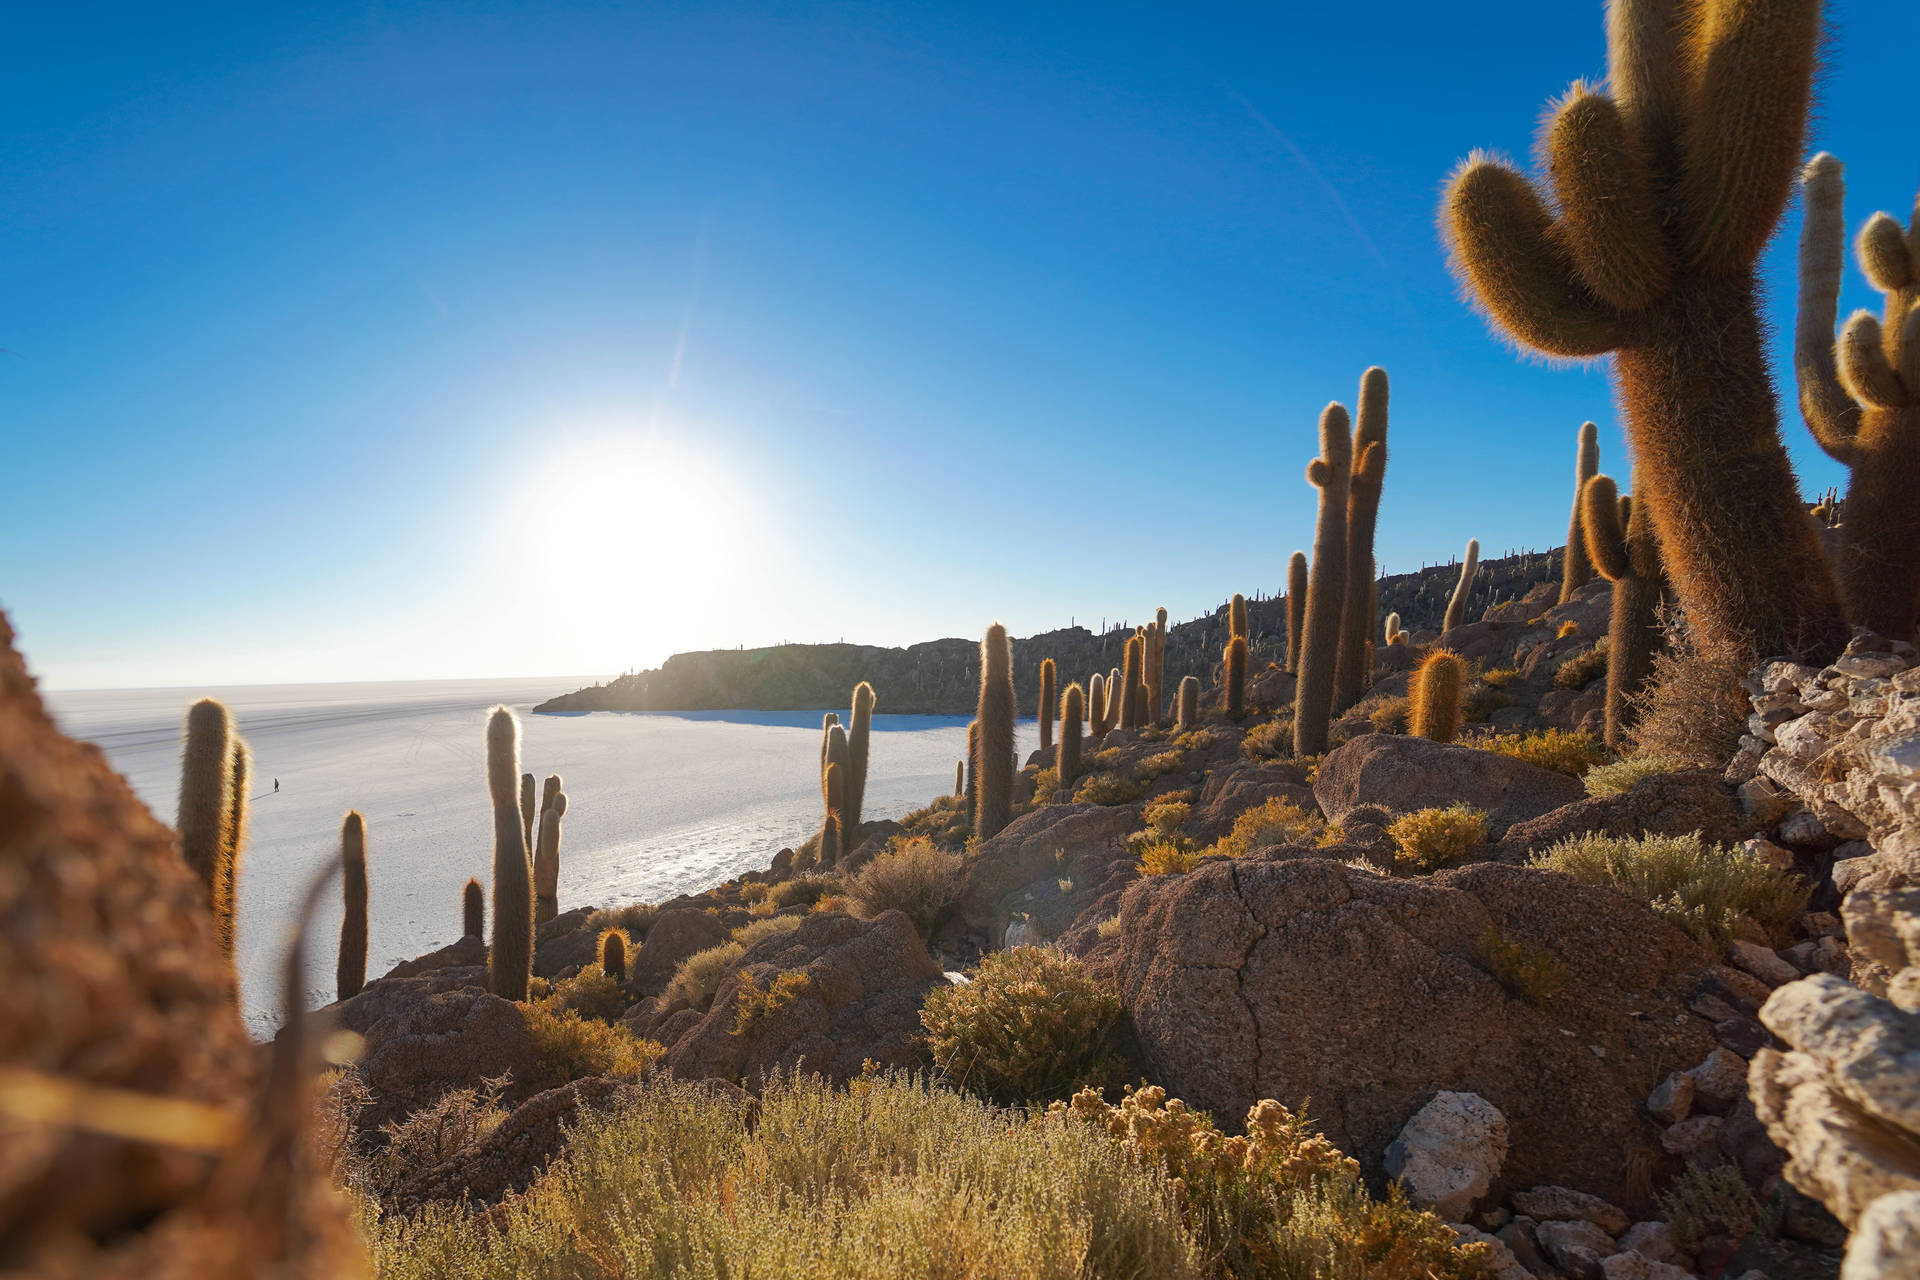 Cactus In The Desert In Chile Wallpaper